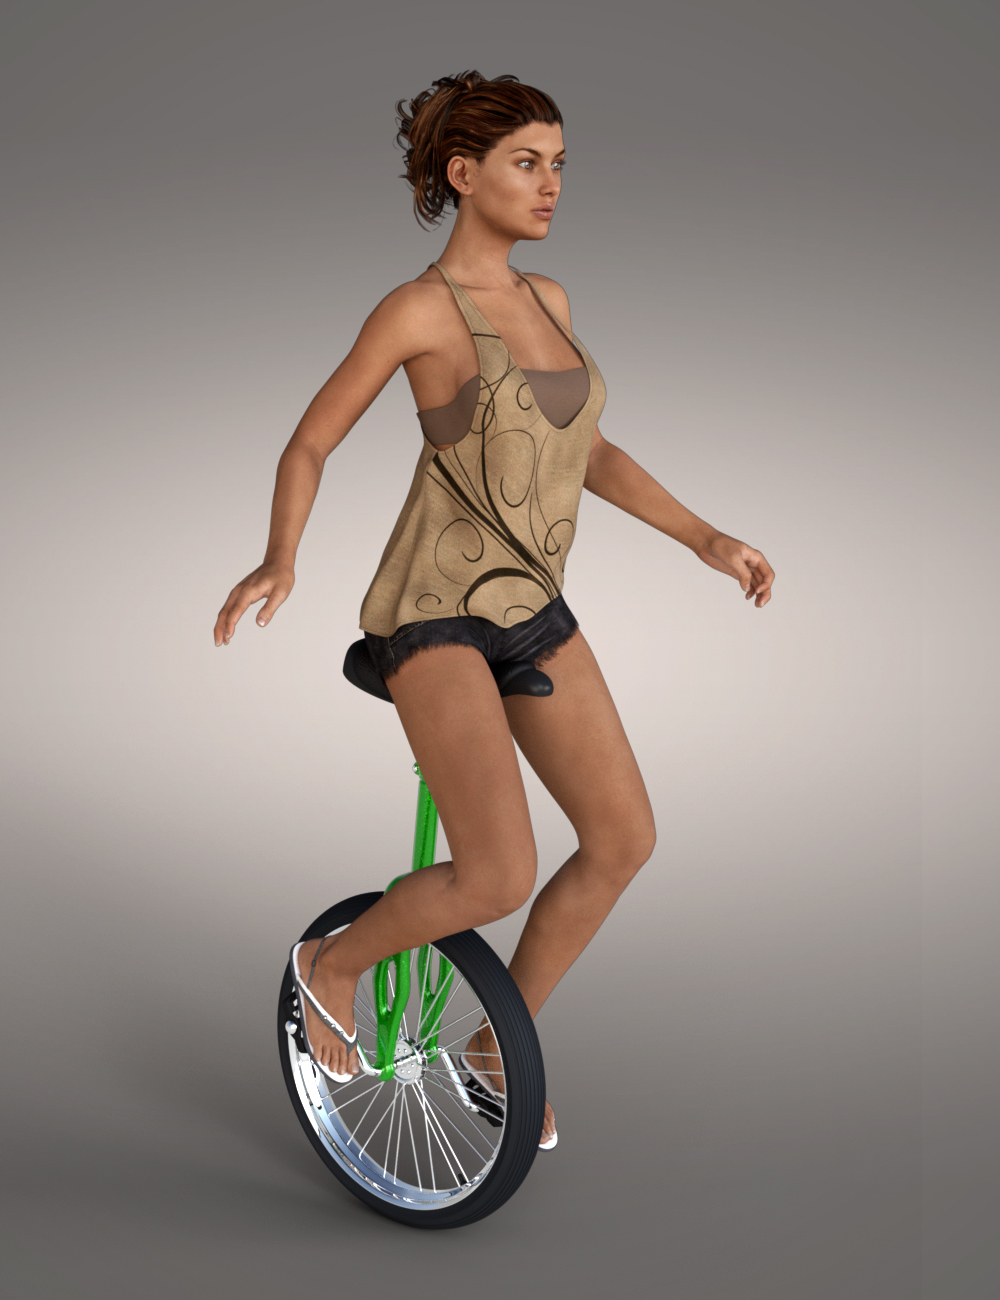 Unicycle by: Mechaven, 3D Models by Daz 3D